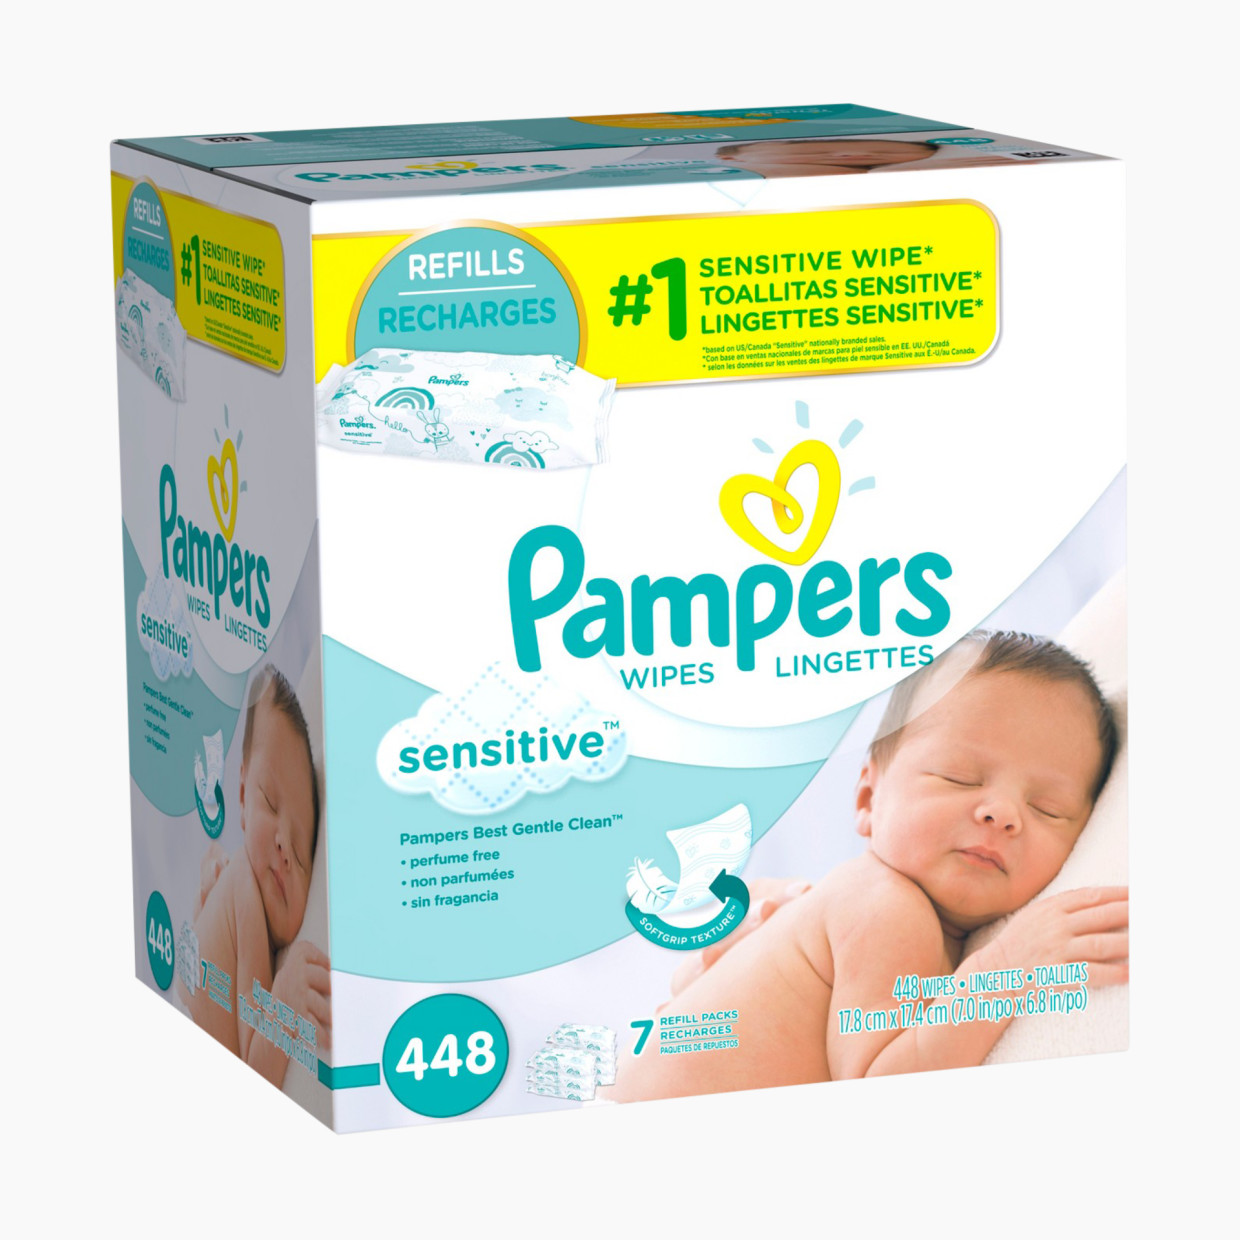 Pampers Sensitive Wipes - 448.